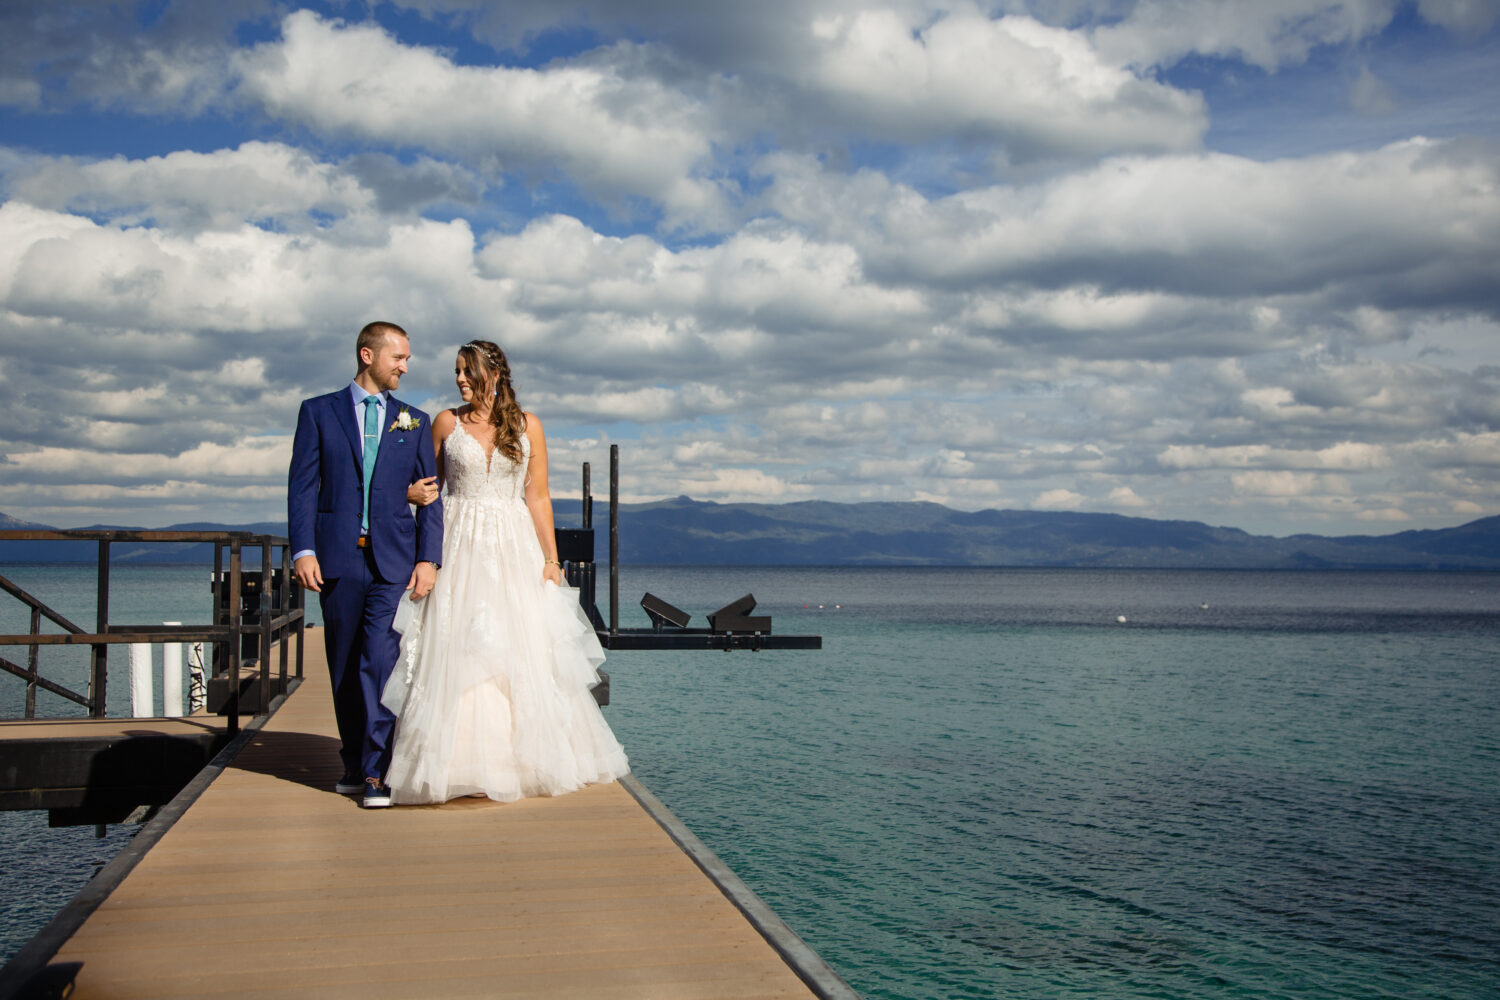 A romantic walk on the pier after getting married at a private home in Lake Tahoe.